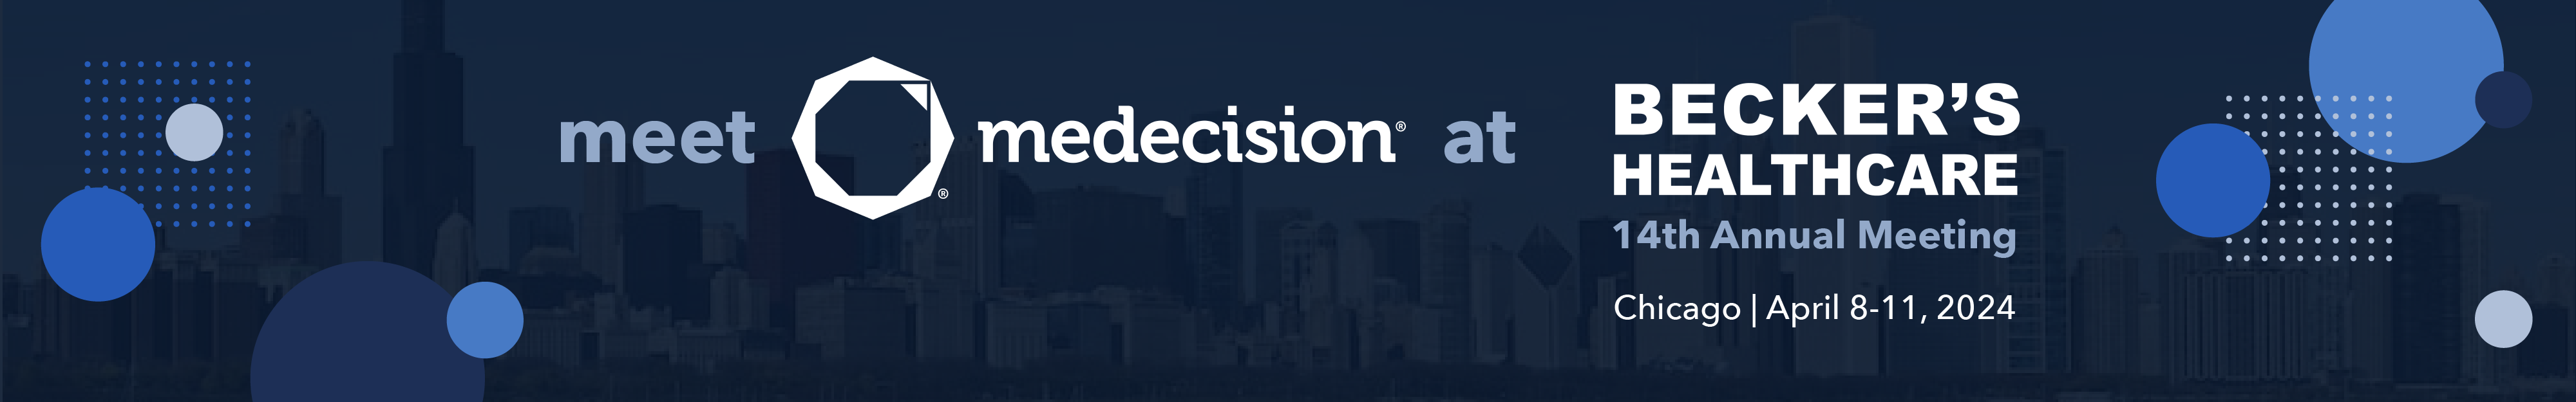 Meet Medecision at Becker's Healthcare 14th Annual Meeting in Chicago, April 8 - 11, 2024!